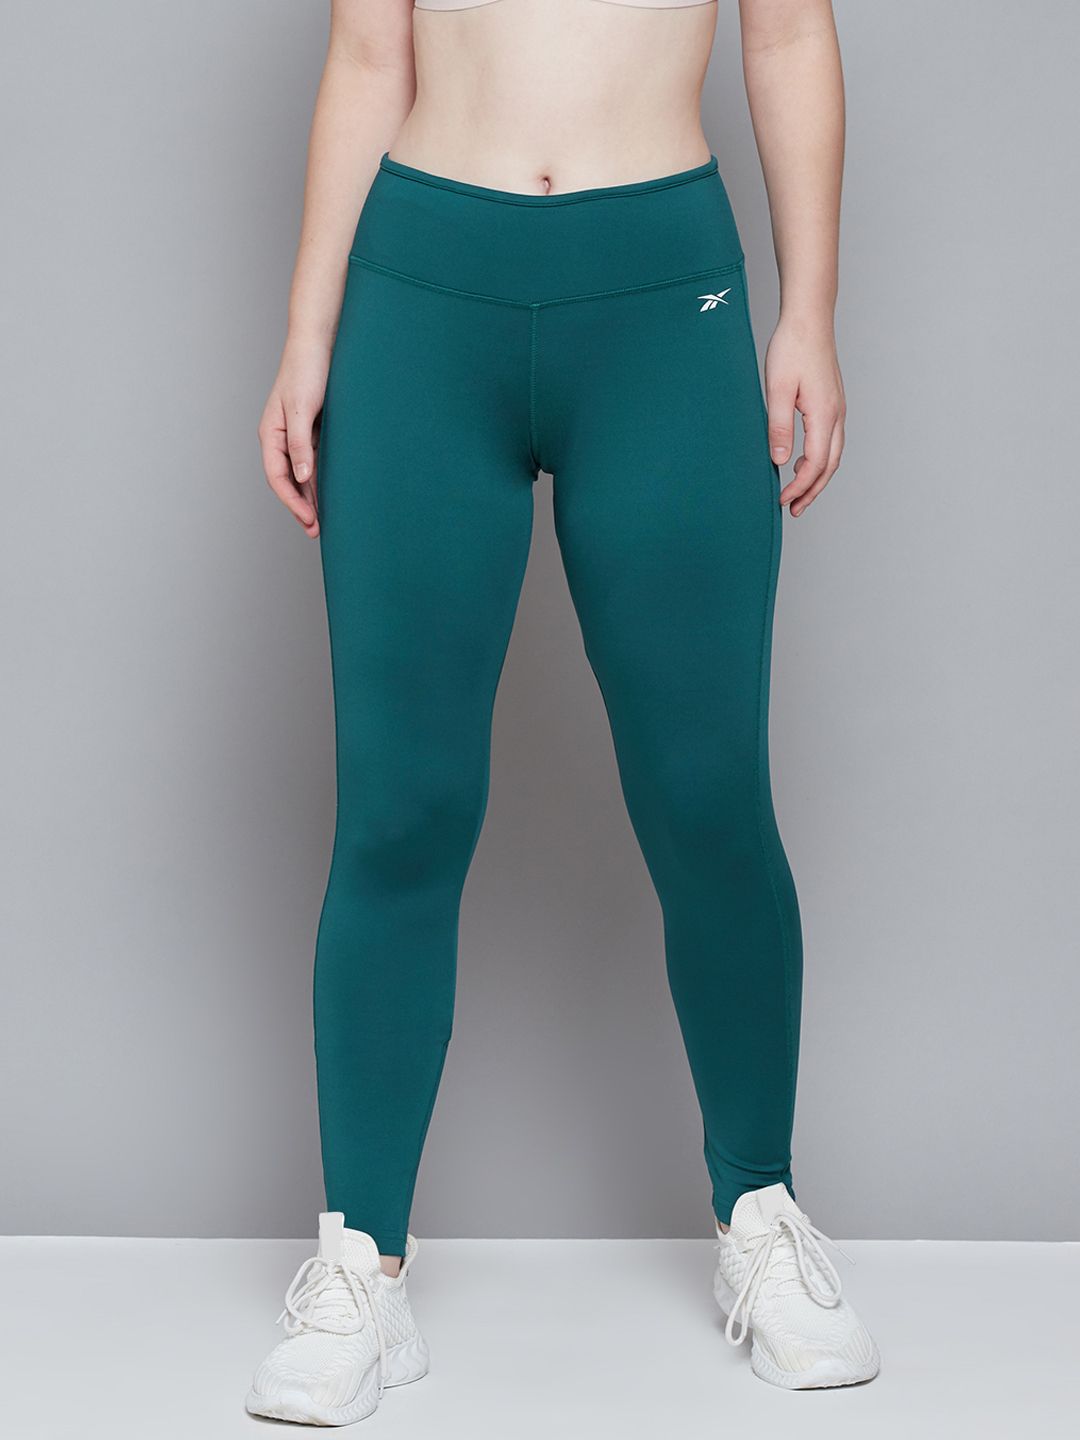 Reebok Women Teal Blue Solid Foundation Tights Price in India